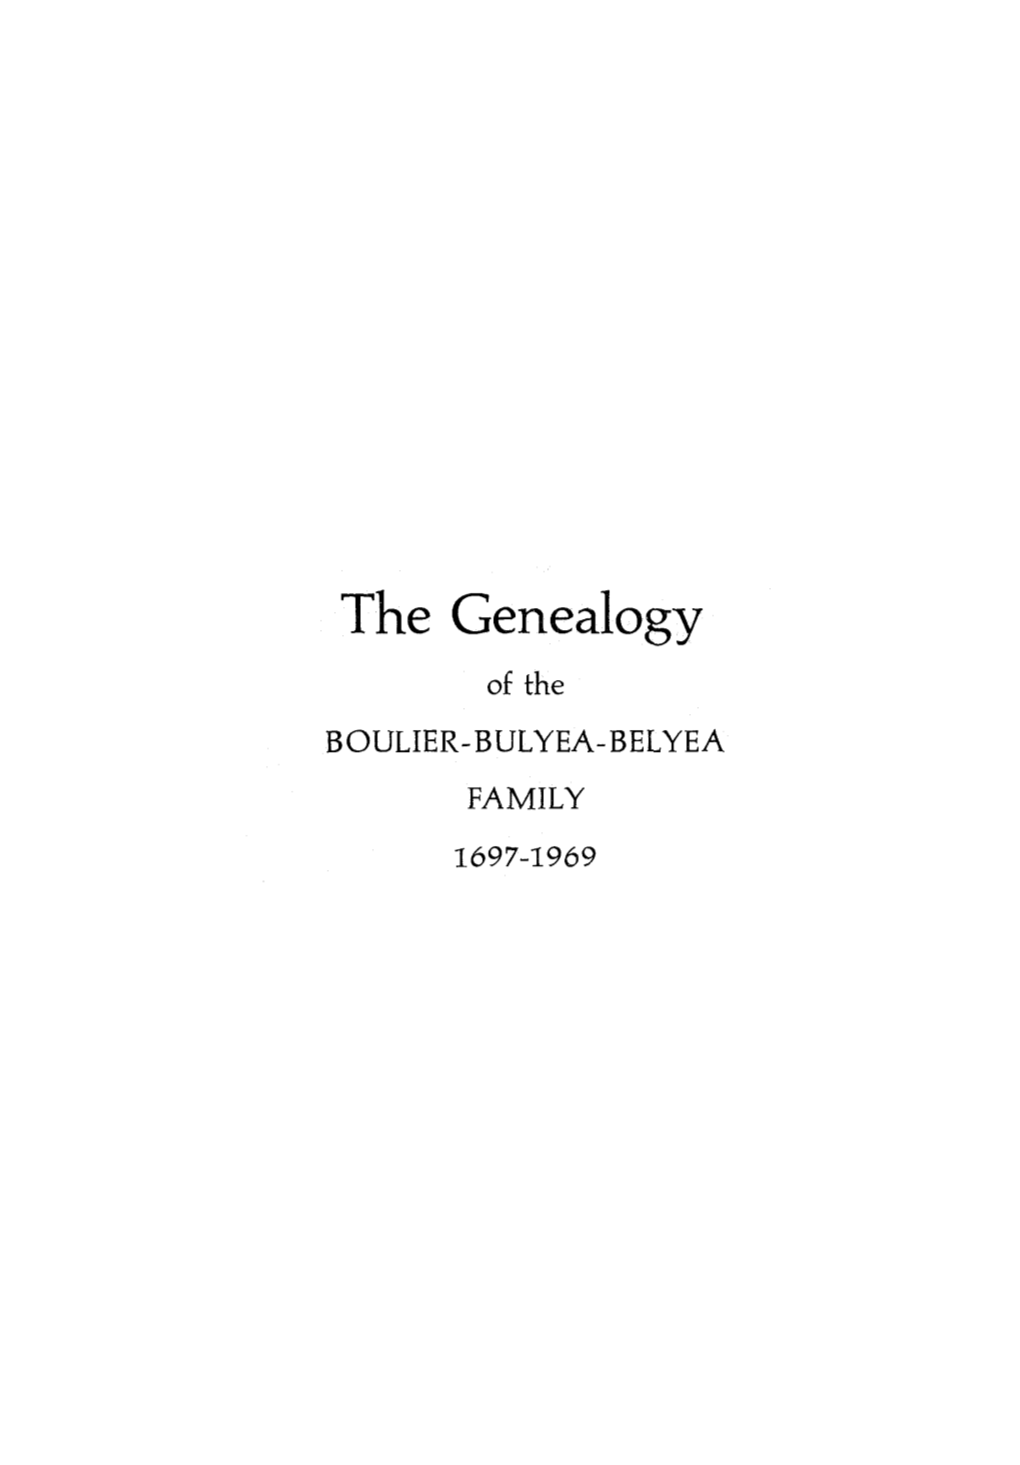 The Genealogy of the BOULIER-BULYEA-BELYEA FAMILY